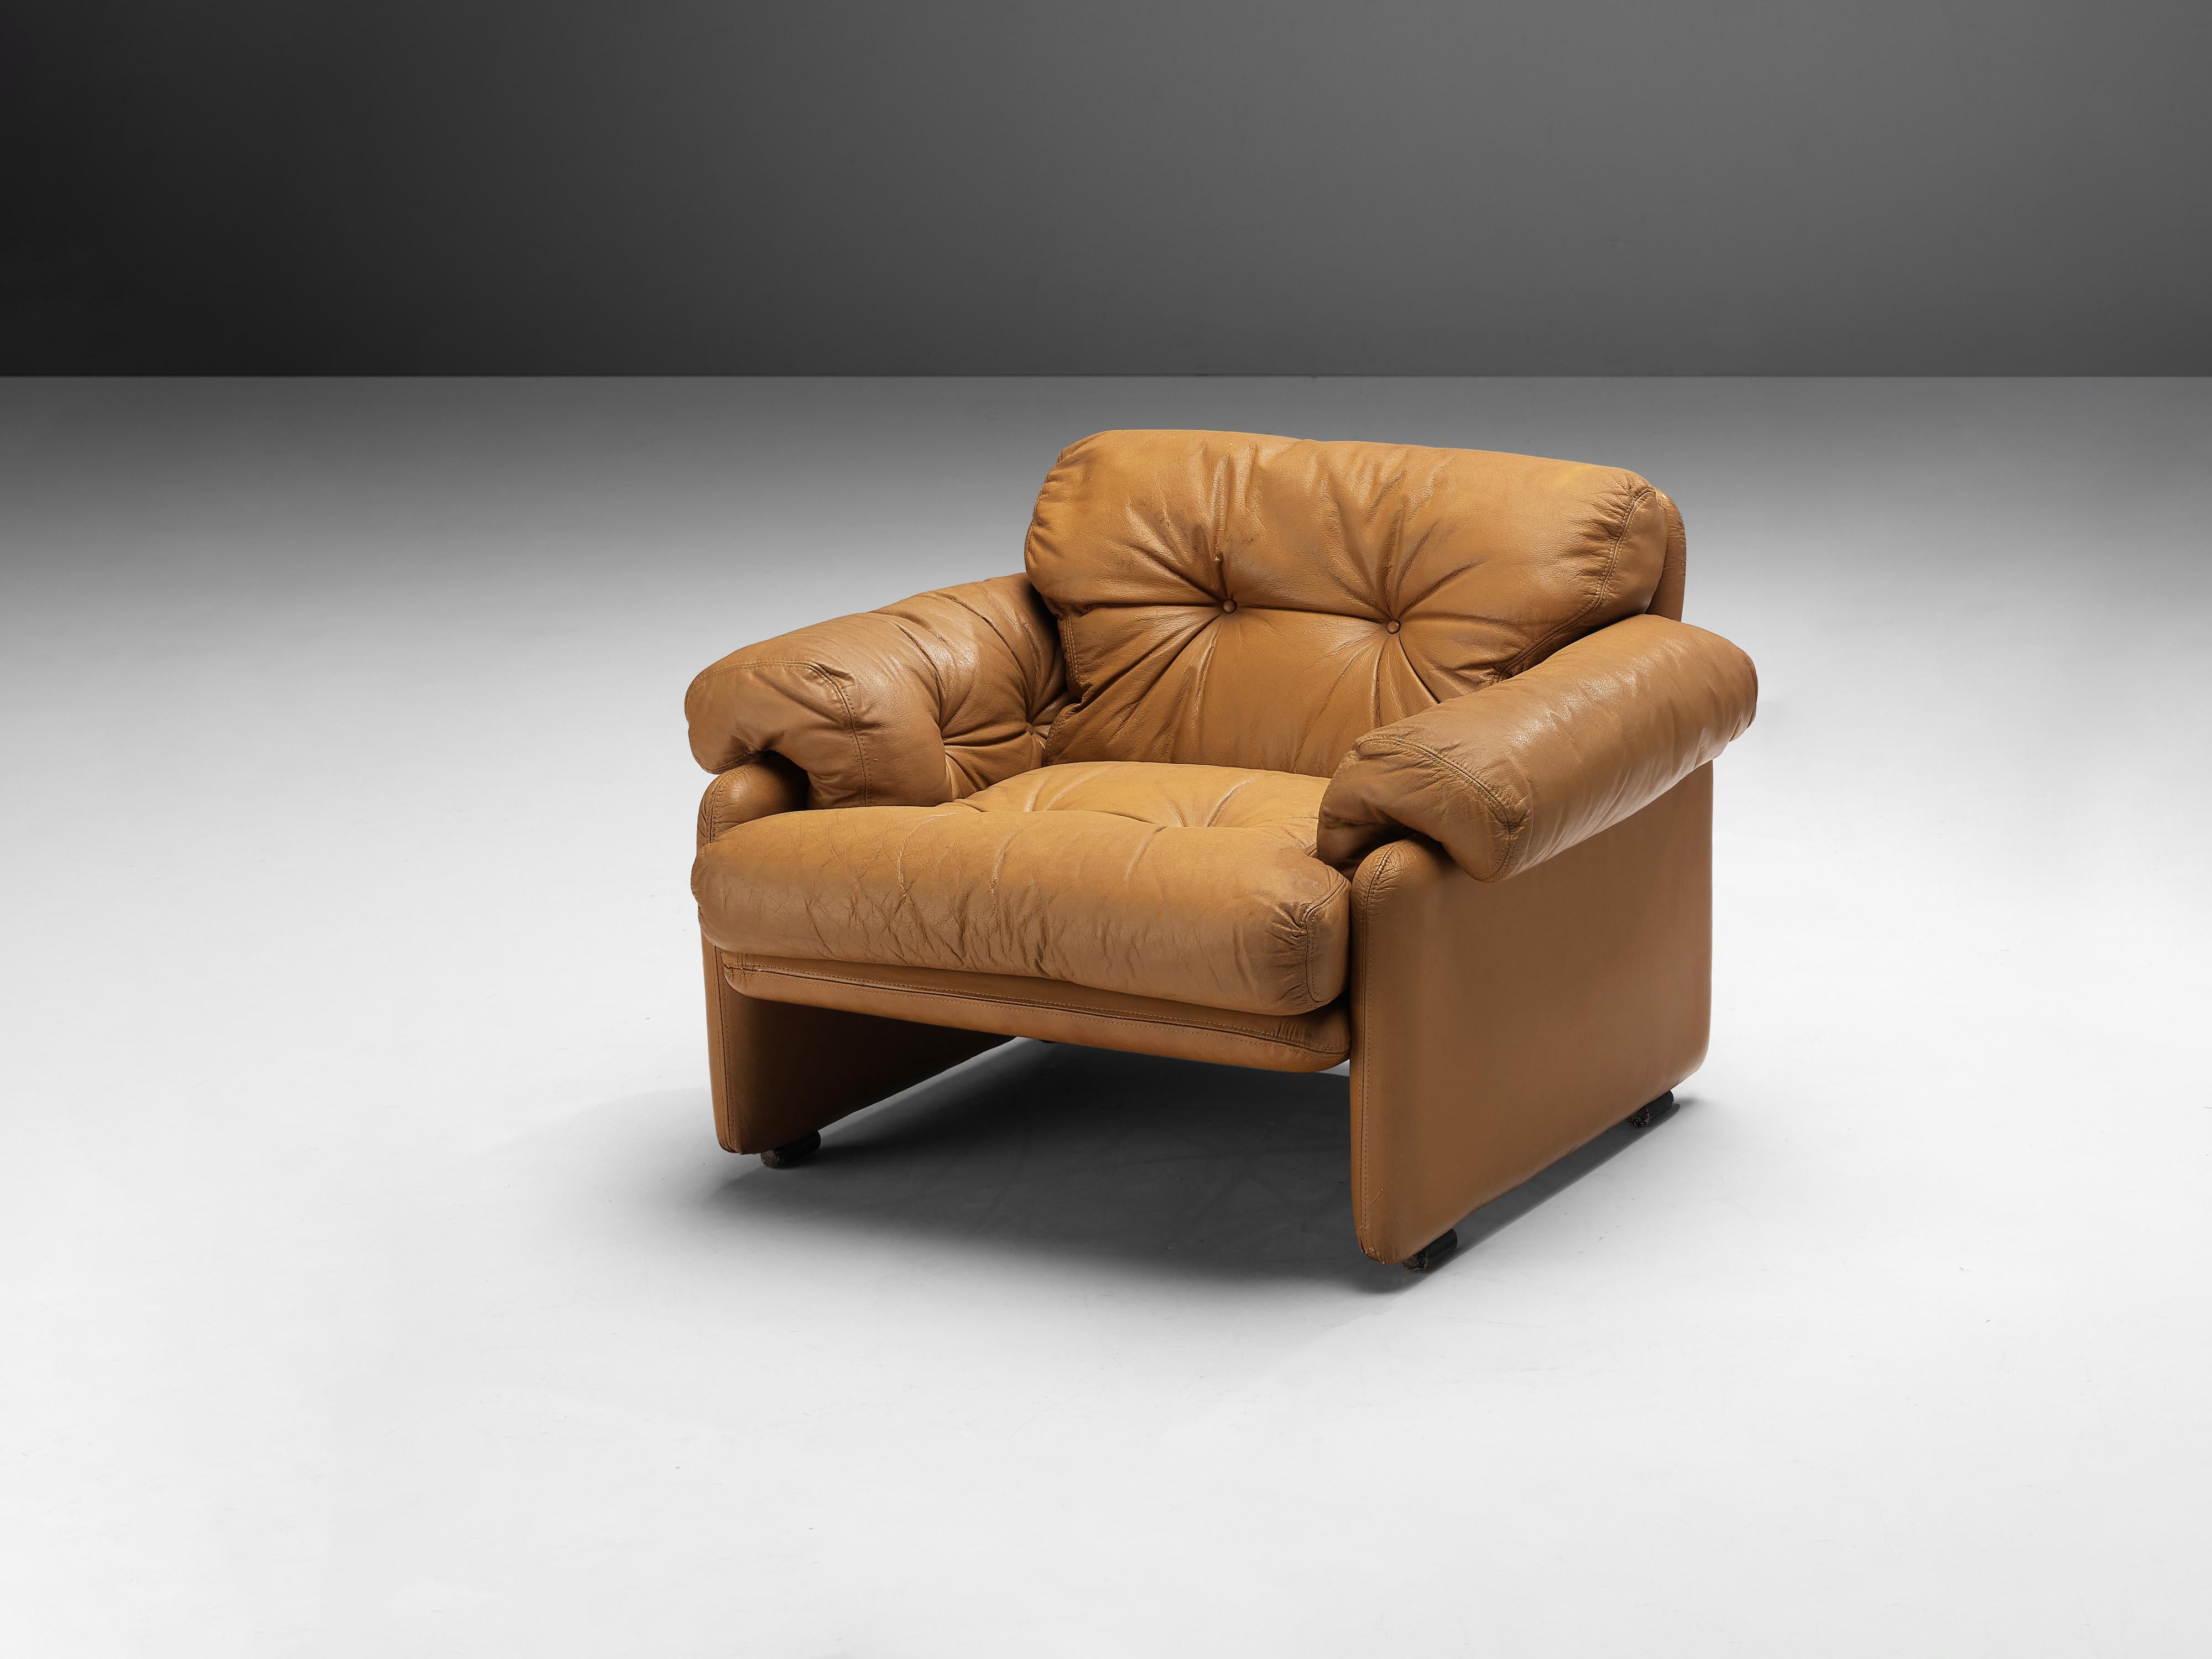 Afra & Tobia Scarpa for B&B Italia 'Coronado' Lounge Chair in Cognac Leather In Good Condition For Sale In Waalwijk, NL